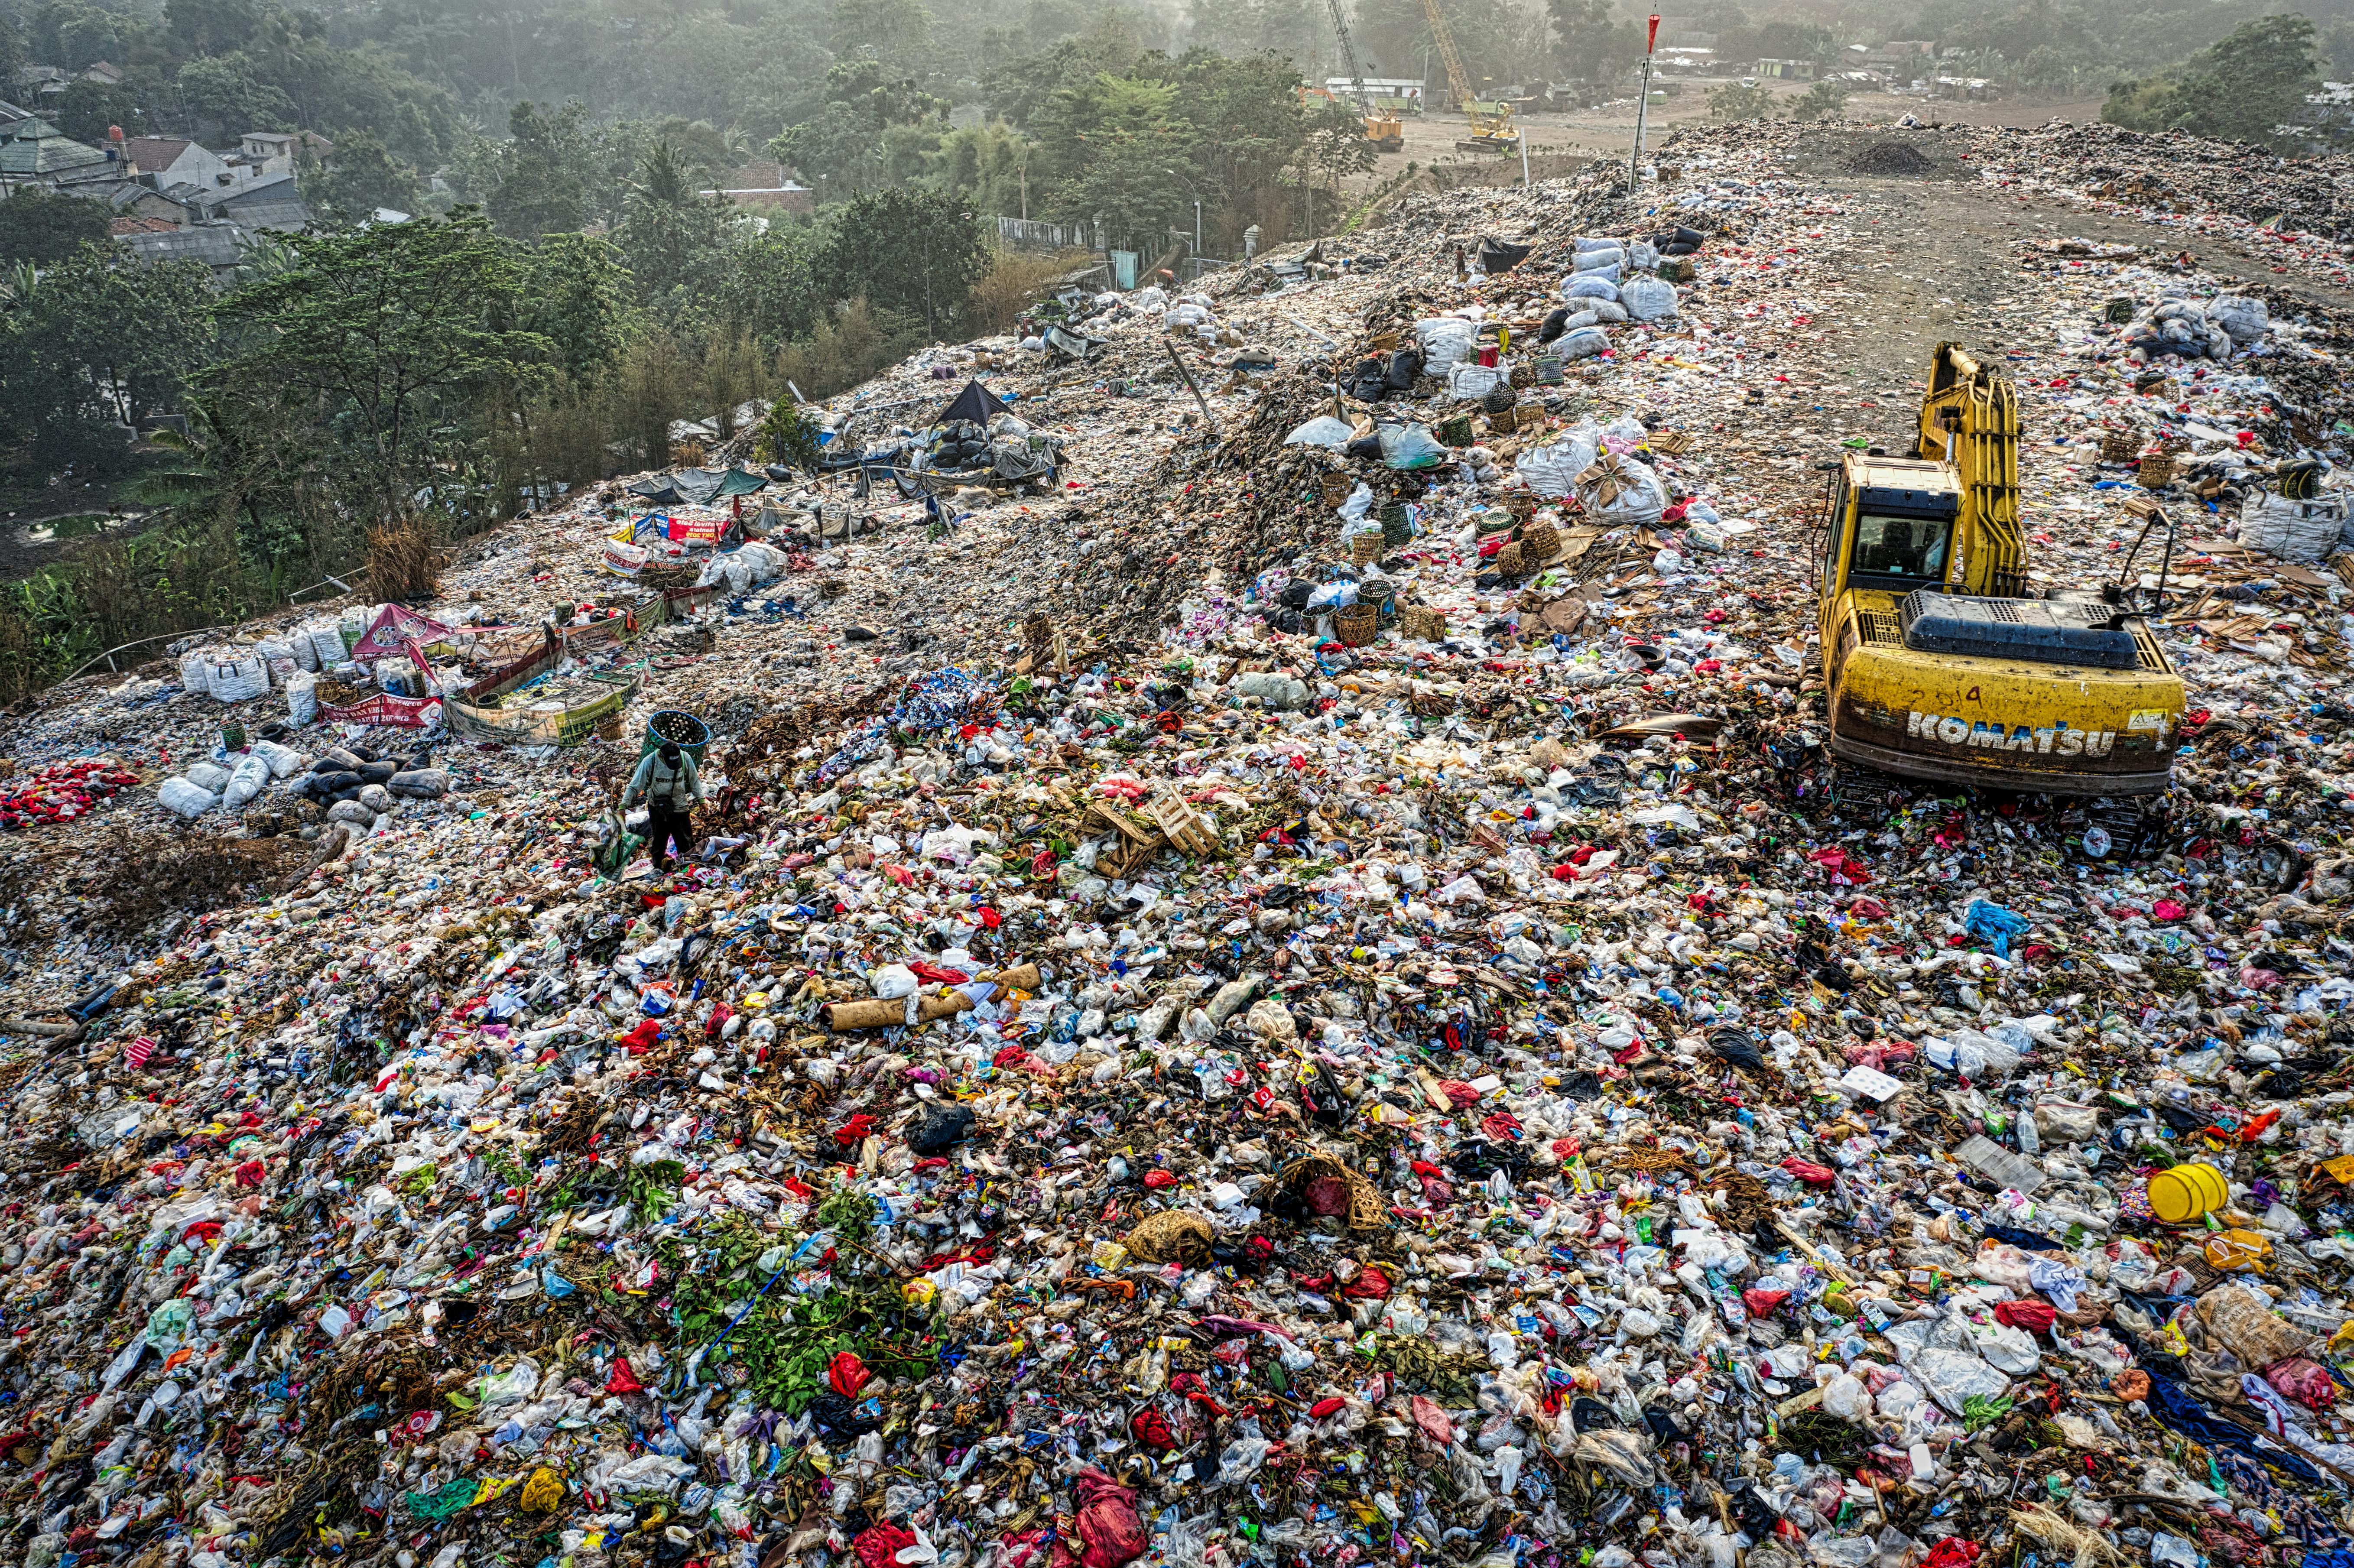 An aerial photograph of a landfill full of plastic